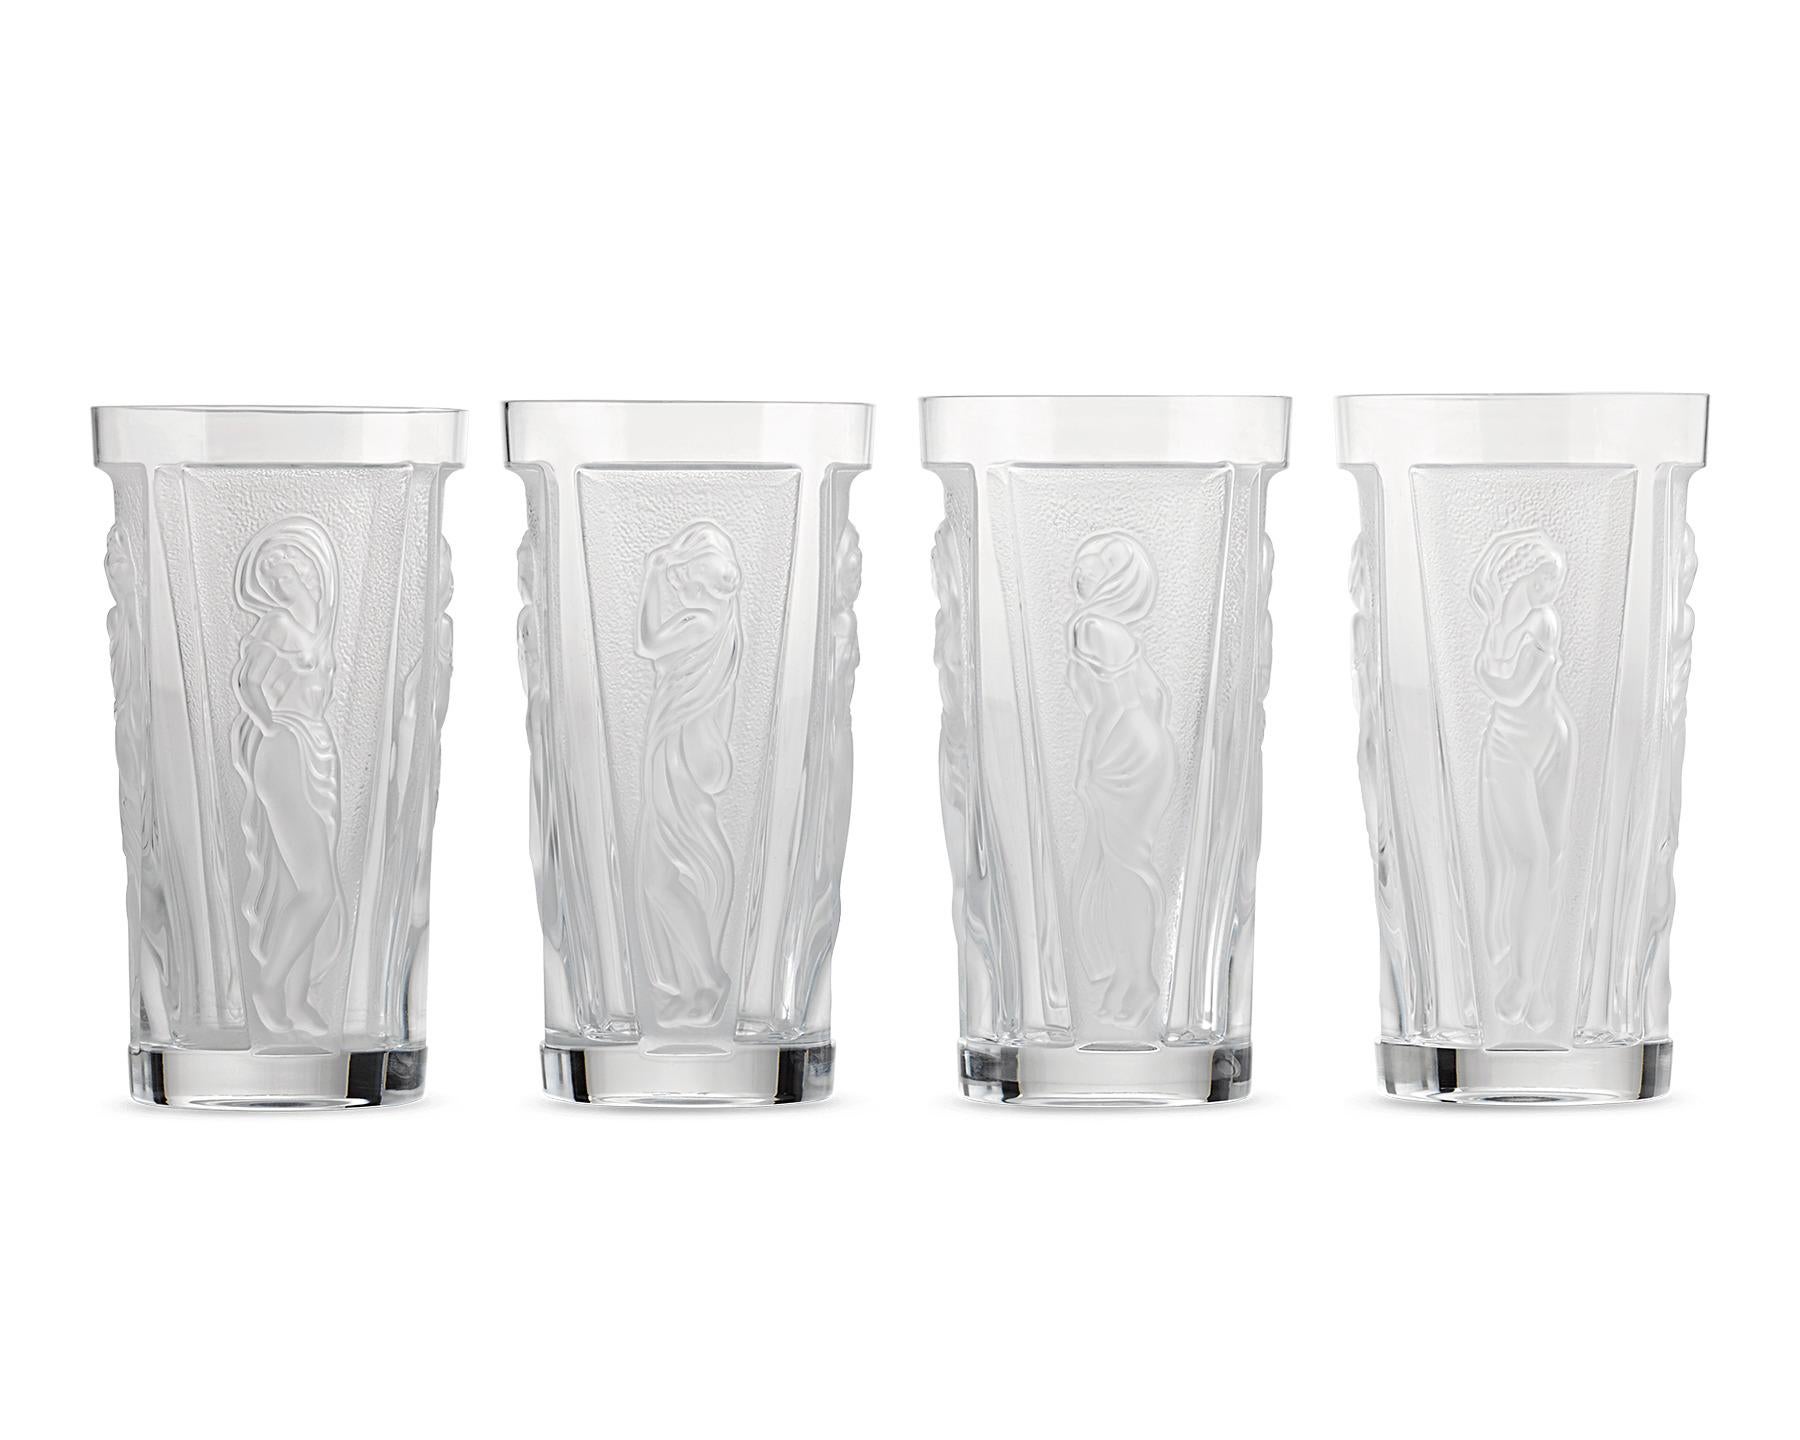 This set of 10 highball glasses channels the inspirational goddesses of Greek mythology in its motif aptly named Muses. Crafted by the famed French cristallerie Lalique, the motif is based on the 1994 perfume bottle pattern Les Muses that was a